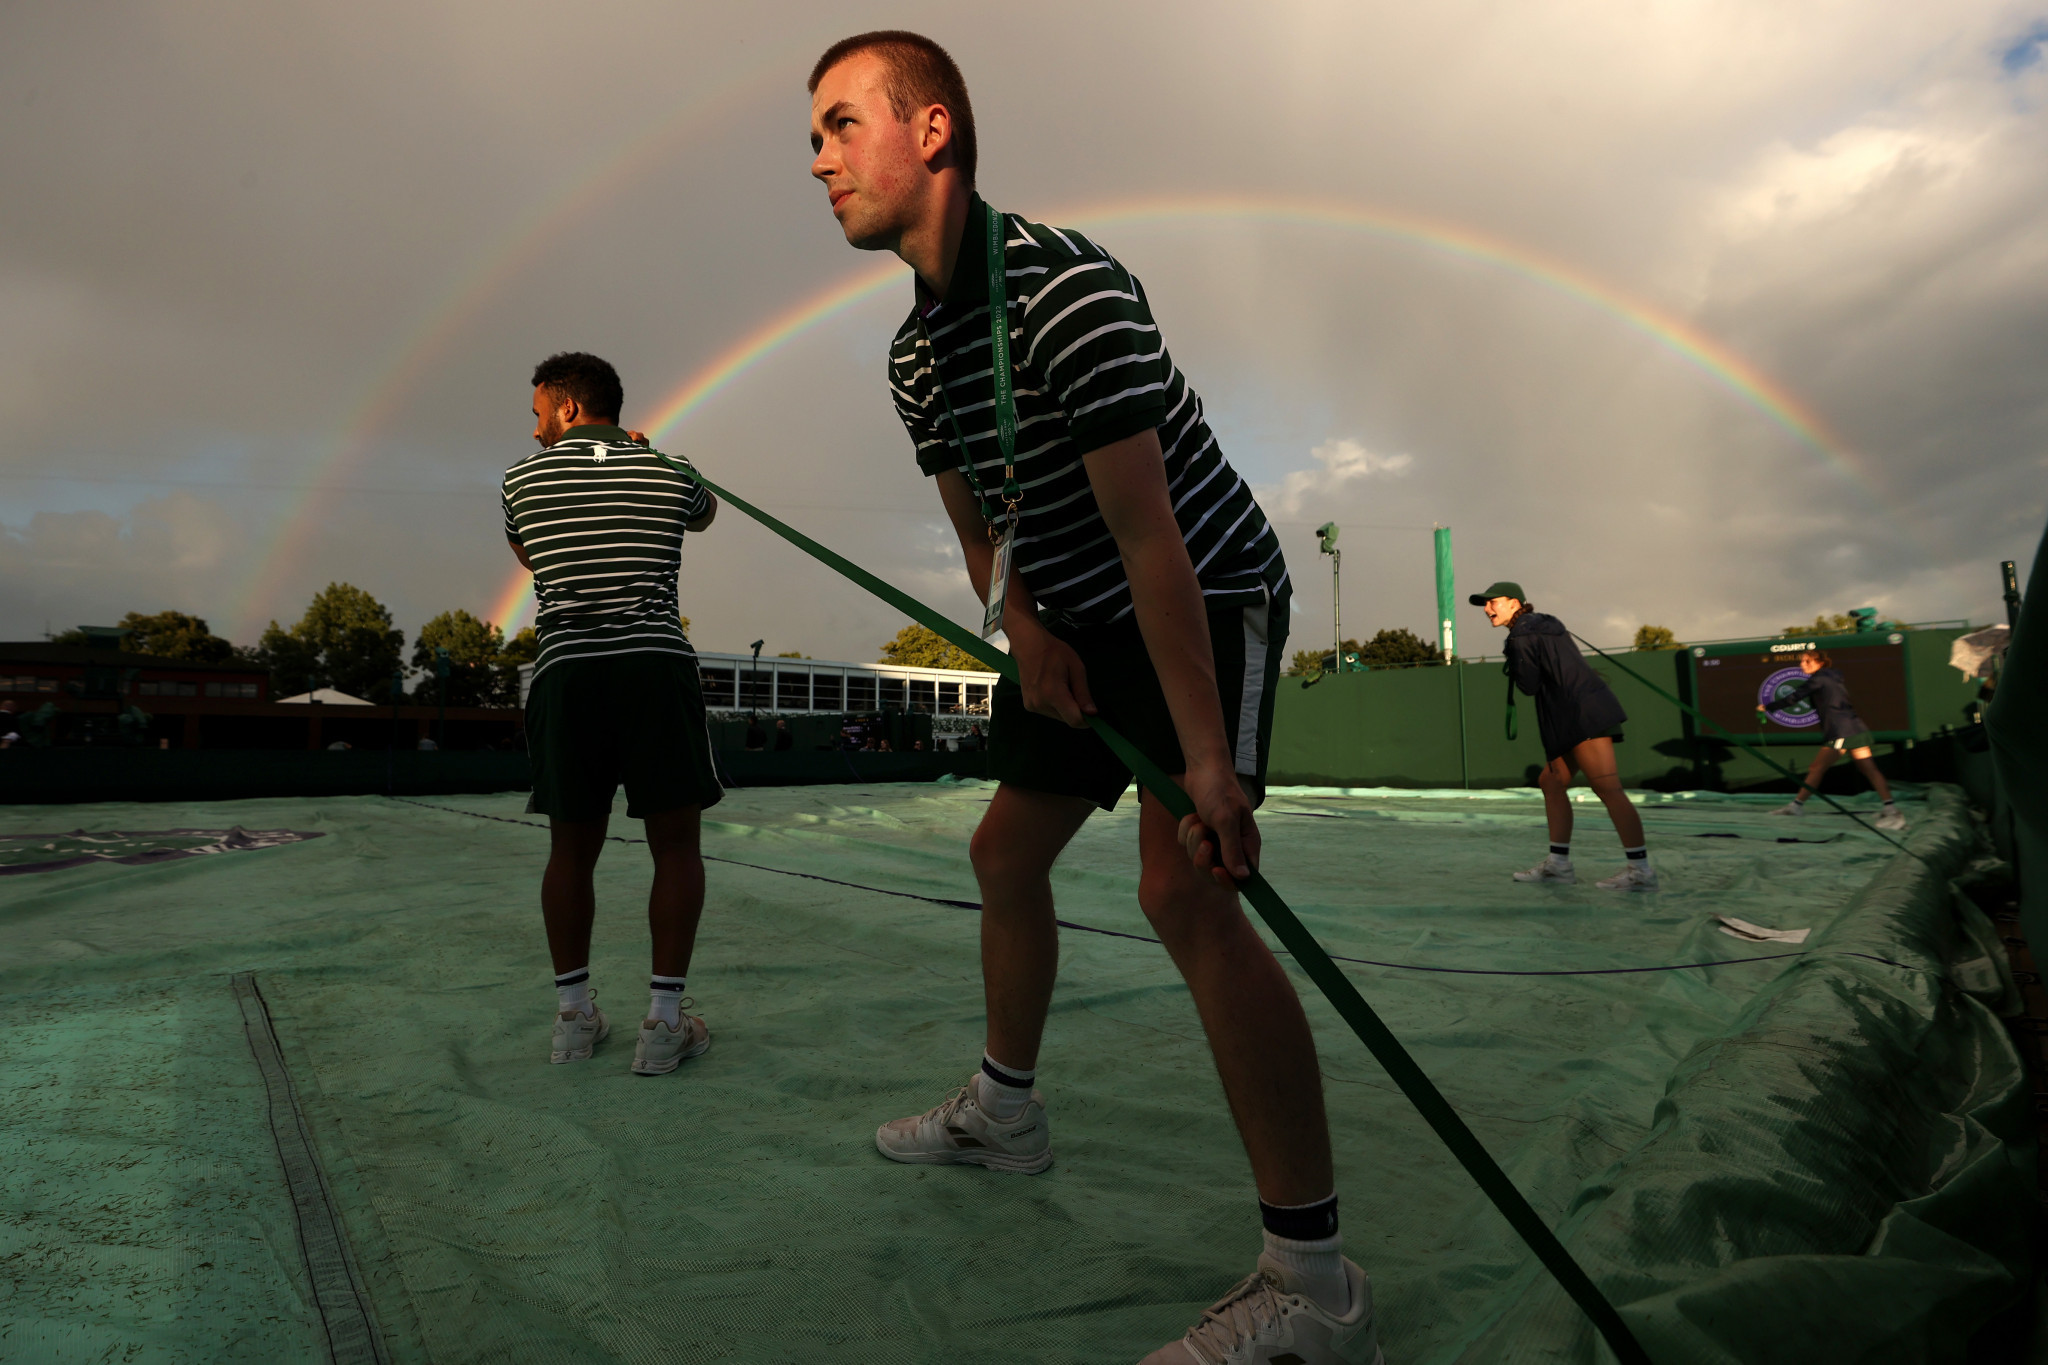 A rainbow appears over SW19 during an early evening weather delay at Wimbledon ©Getty Images